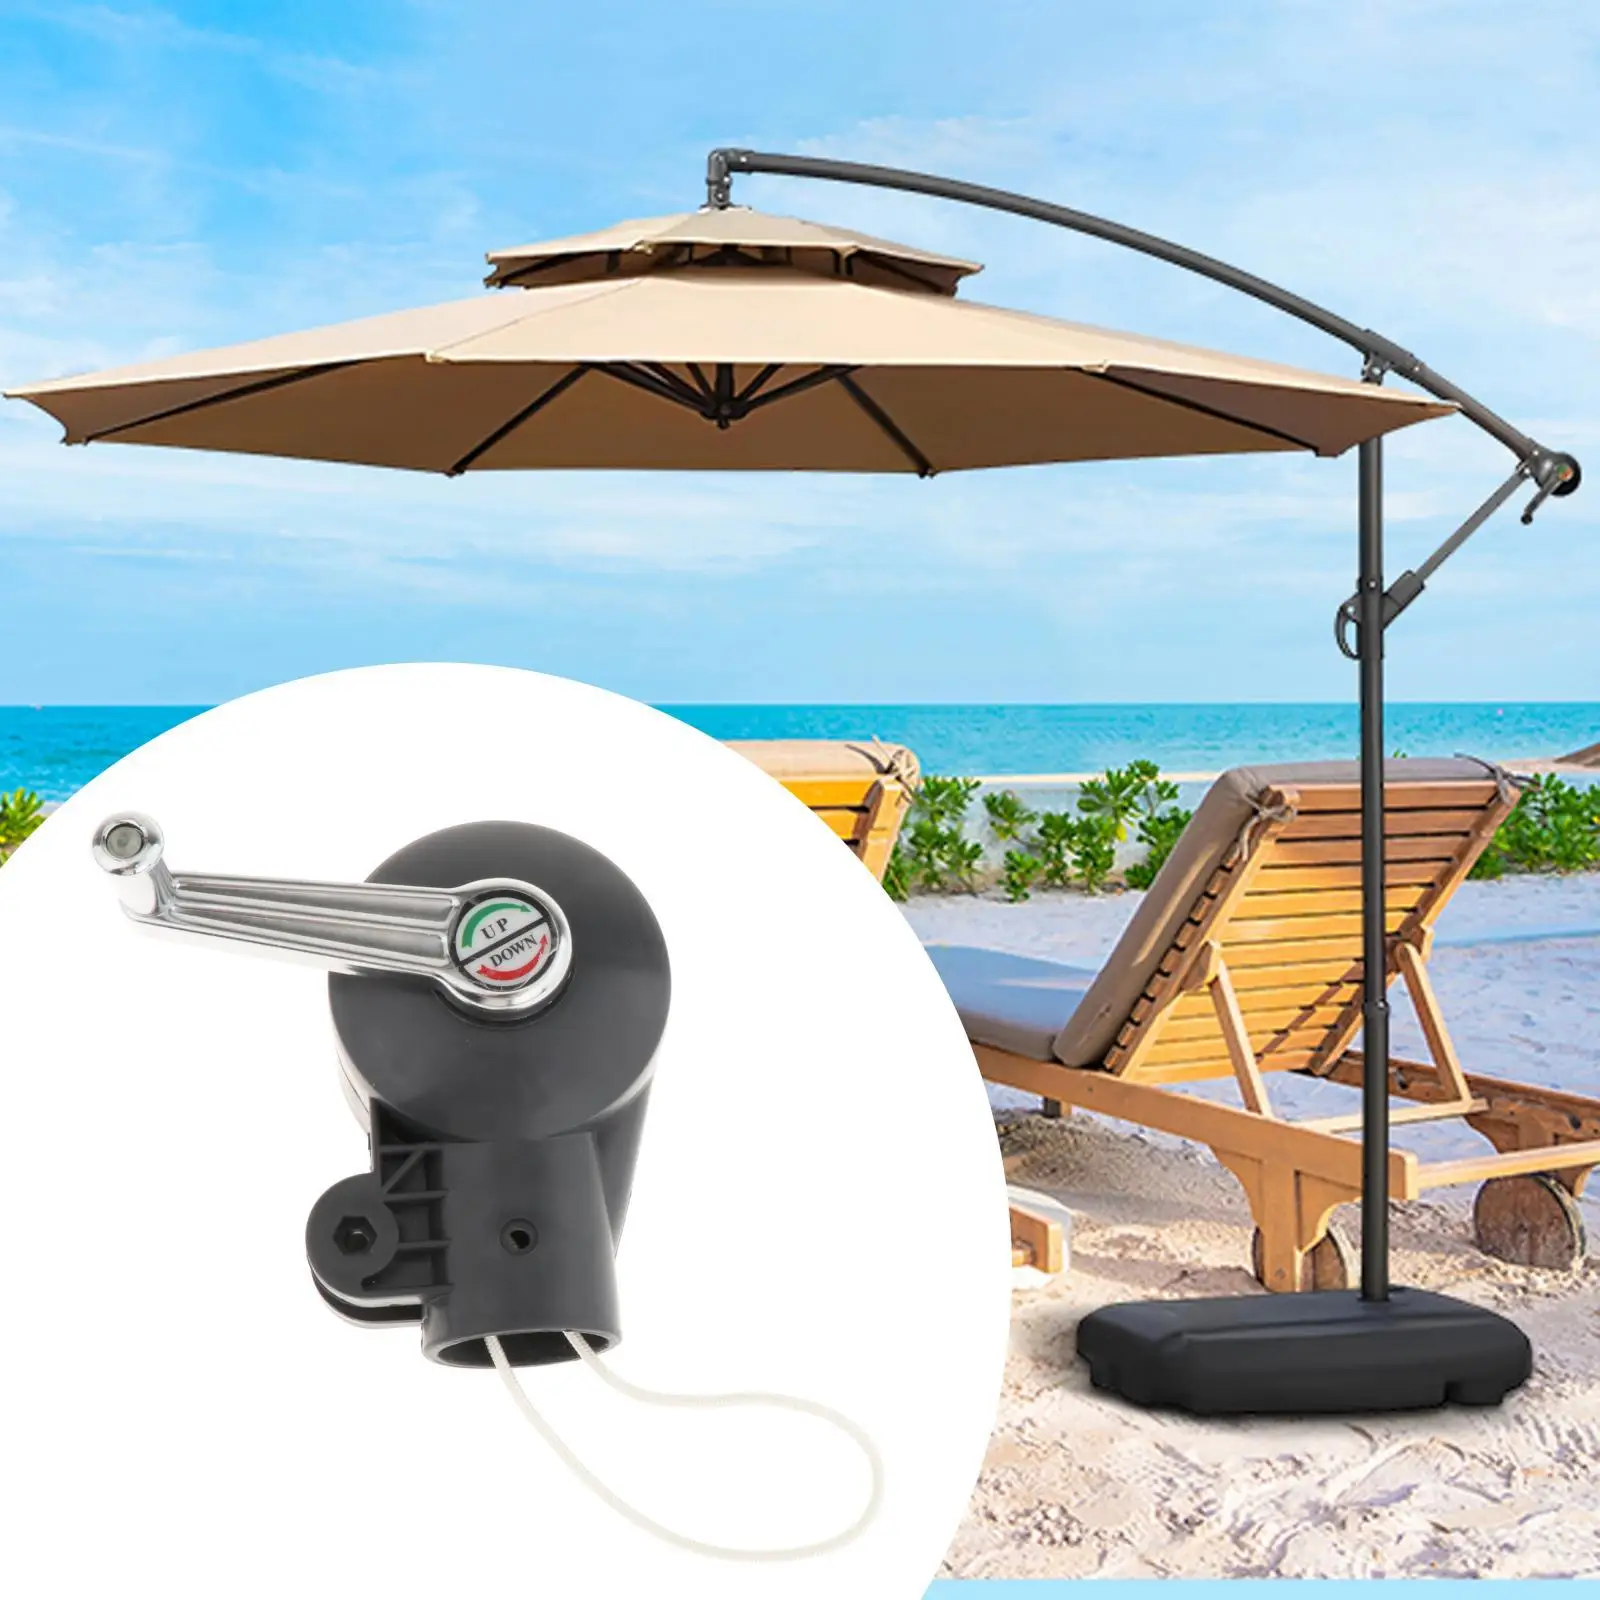 Outdoor Sturdy Hand Tool Patio Umbrella Replacements Terrace Beach Picnic